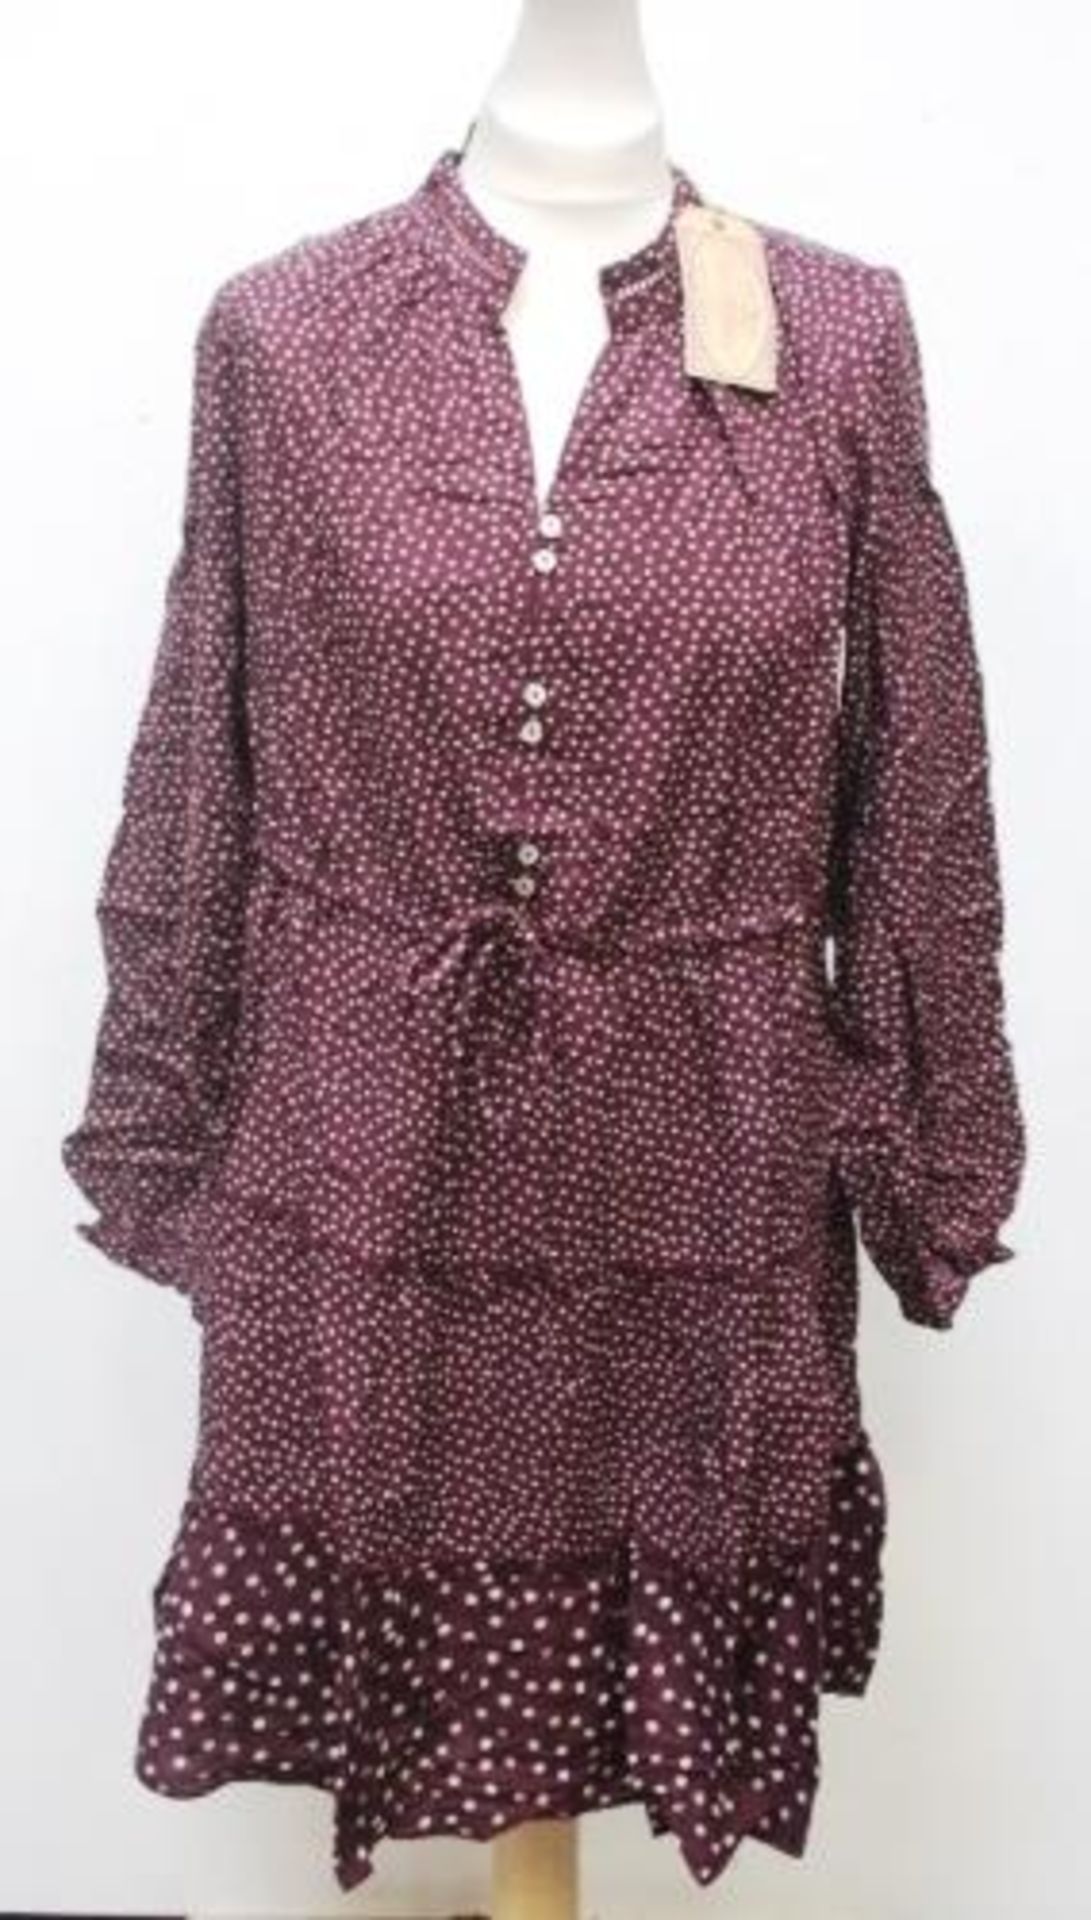 4 x Fat Face deep berry Meredith spot longline tops, and 1 x Ariana spot dress assorted sizes, - Image 3 of 3